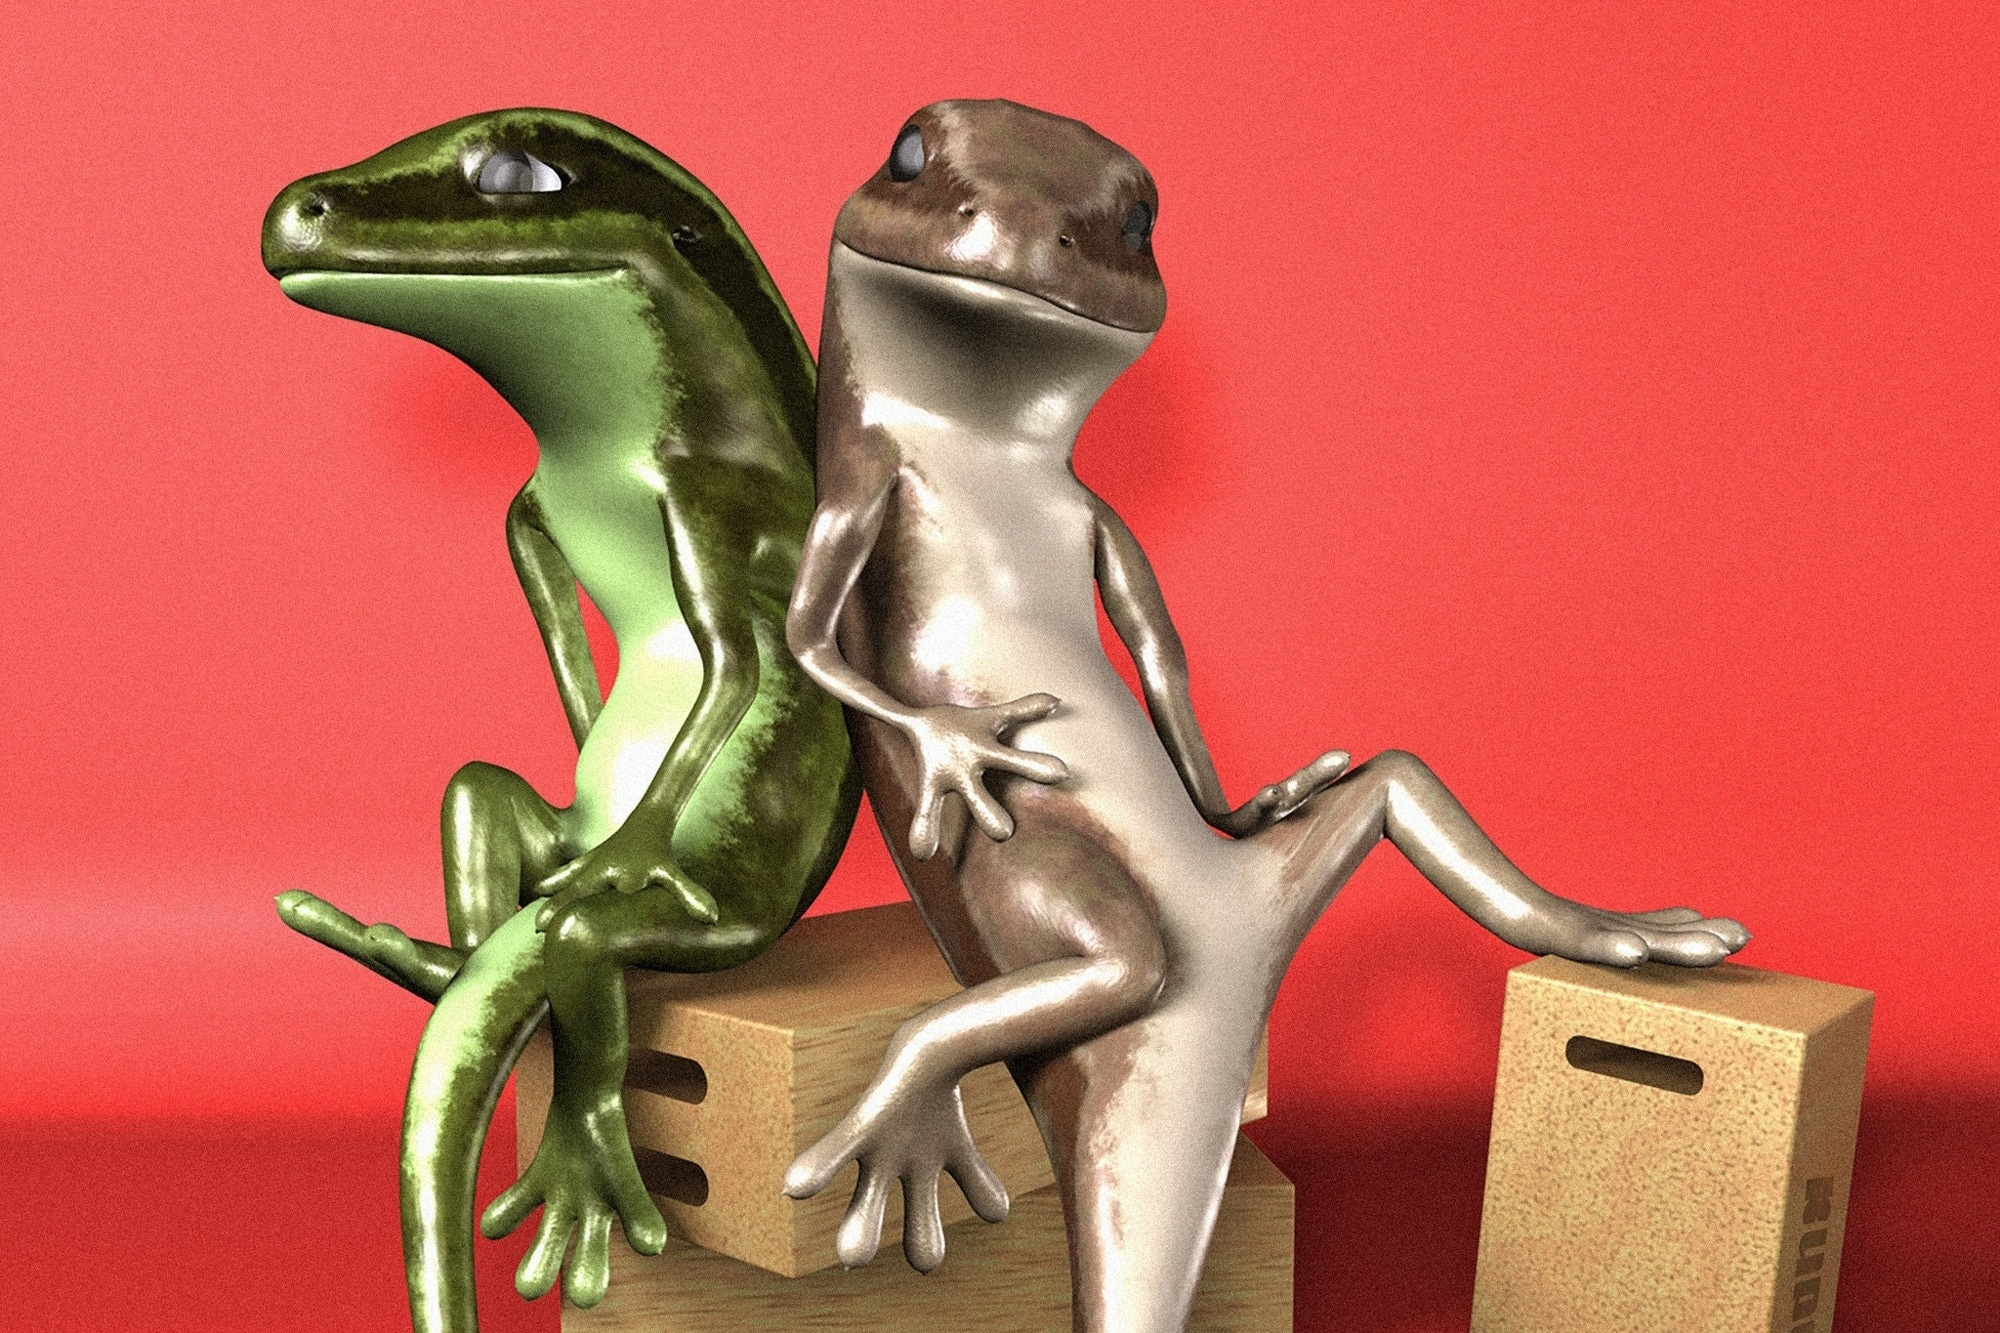 A film still featuring two animated lizards sitting next to each other with a red backdrop behind them.